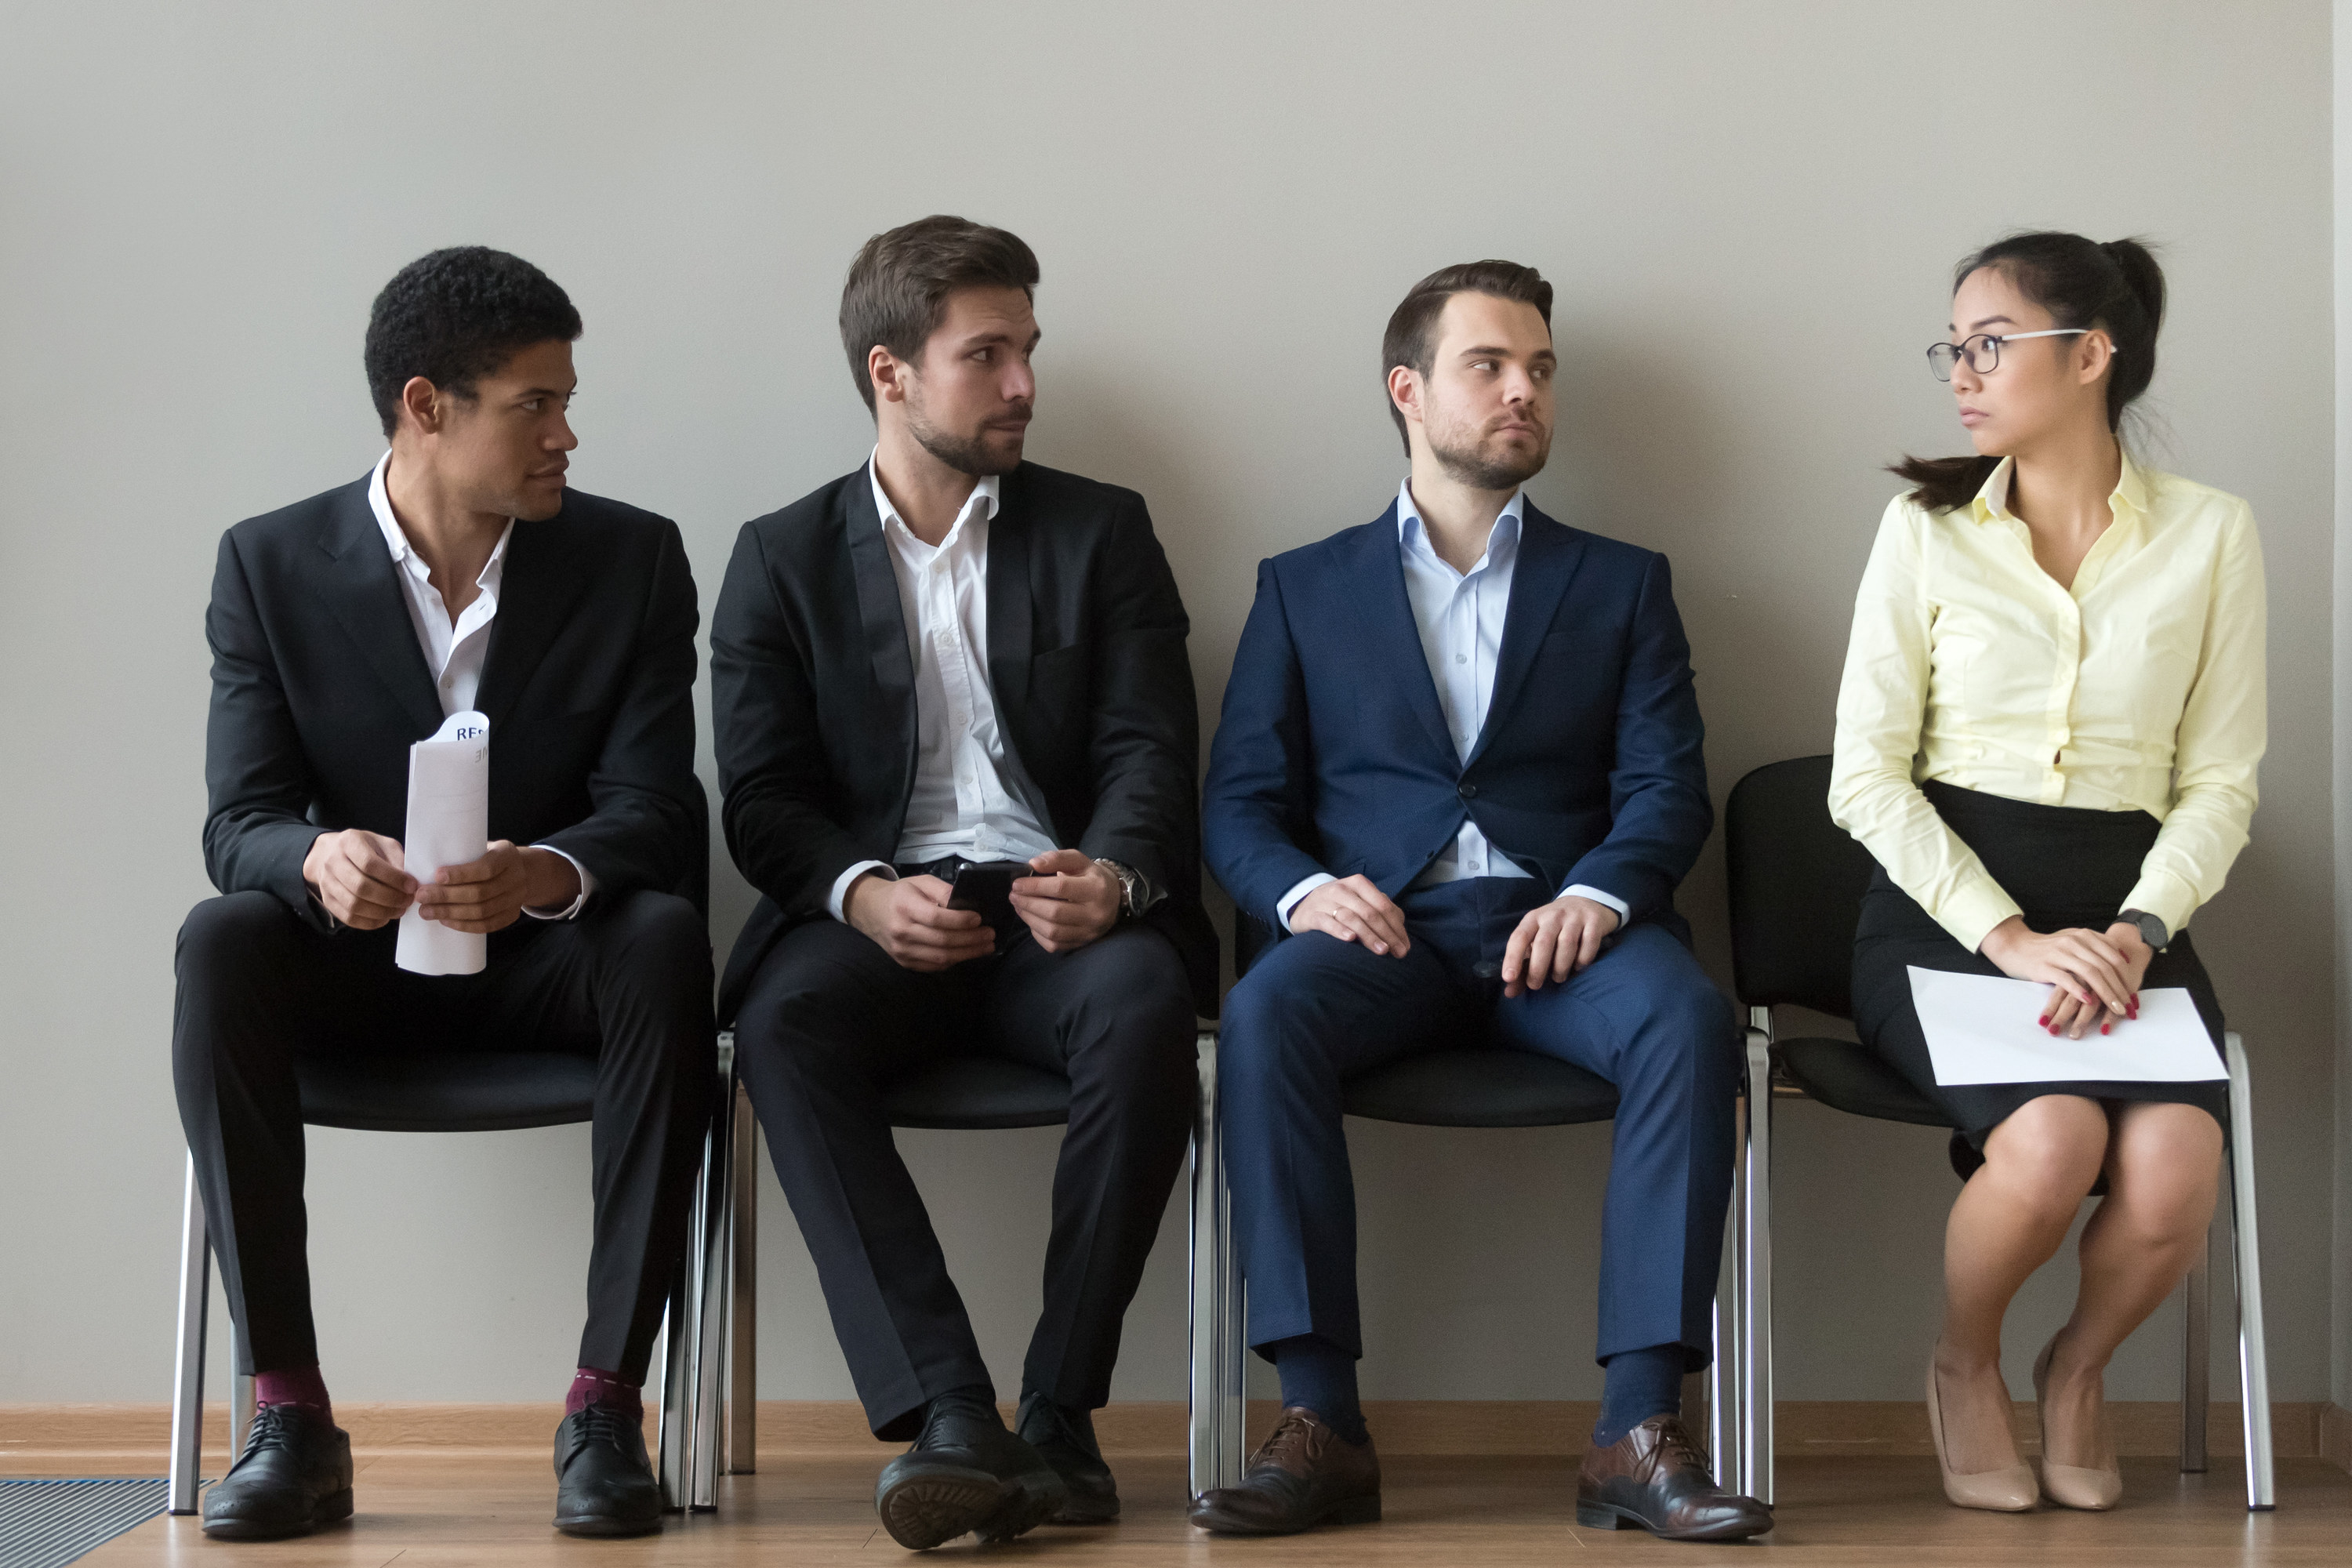 group of men in business suits looking at a woman who appears uncomfortable